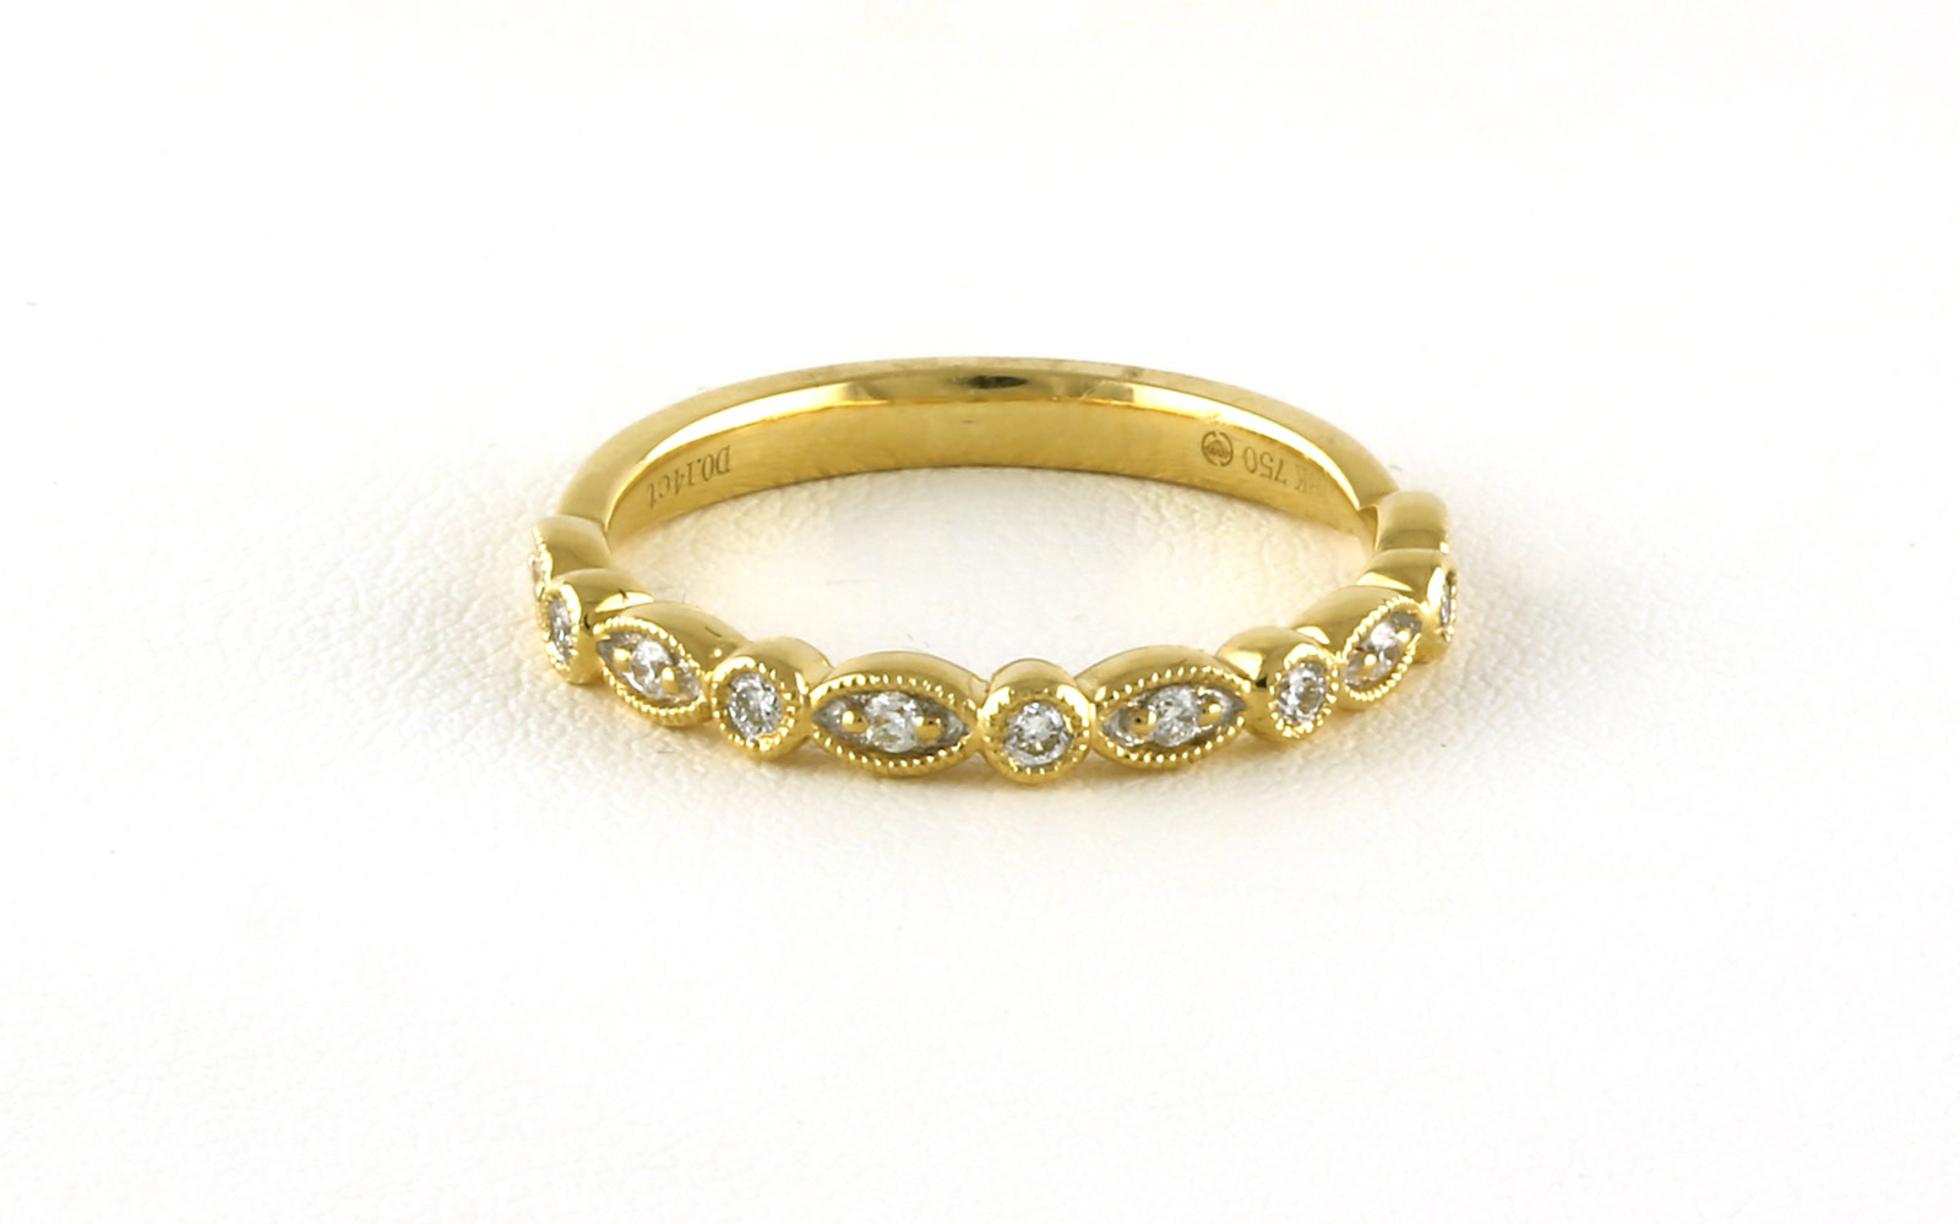 Scalloped-style Diamond Wedding Band with Milgrain Detail in Yellow Gold